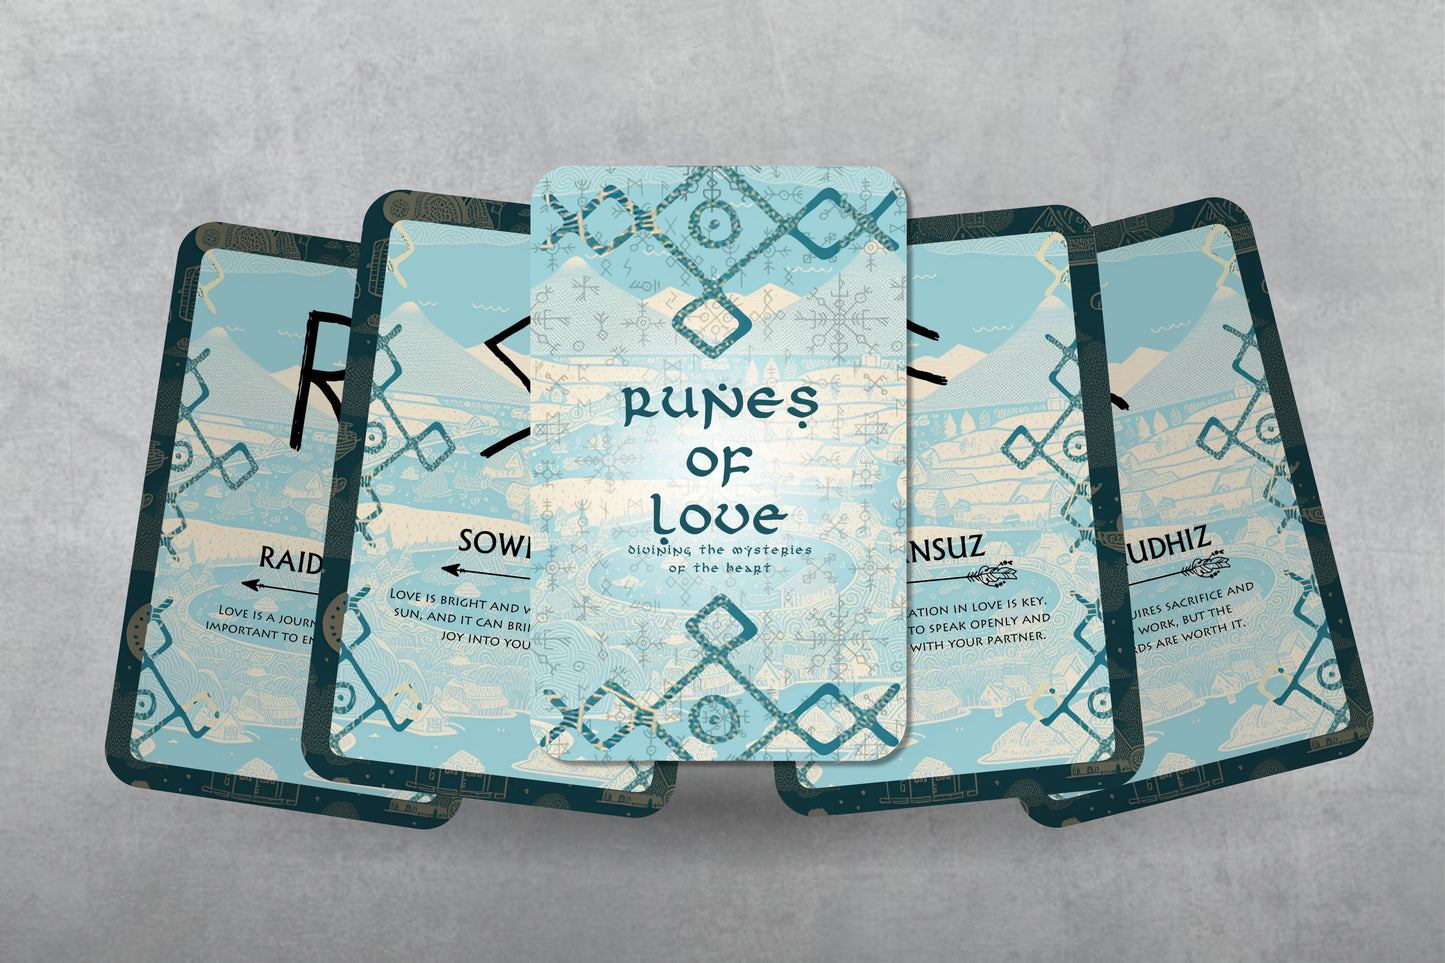 Runes for Love - Divining the mysteries of the Heart